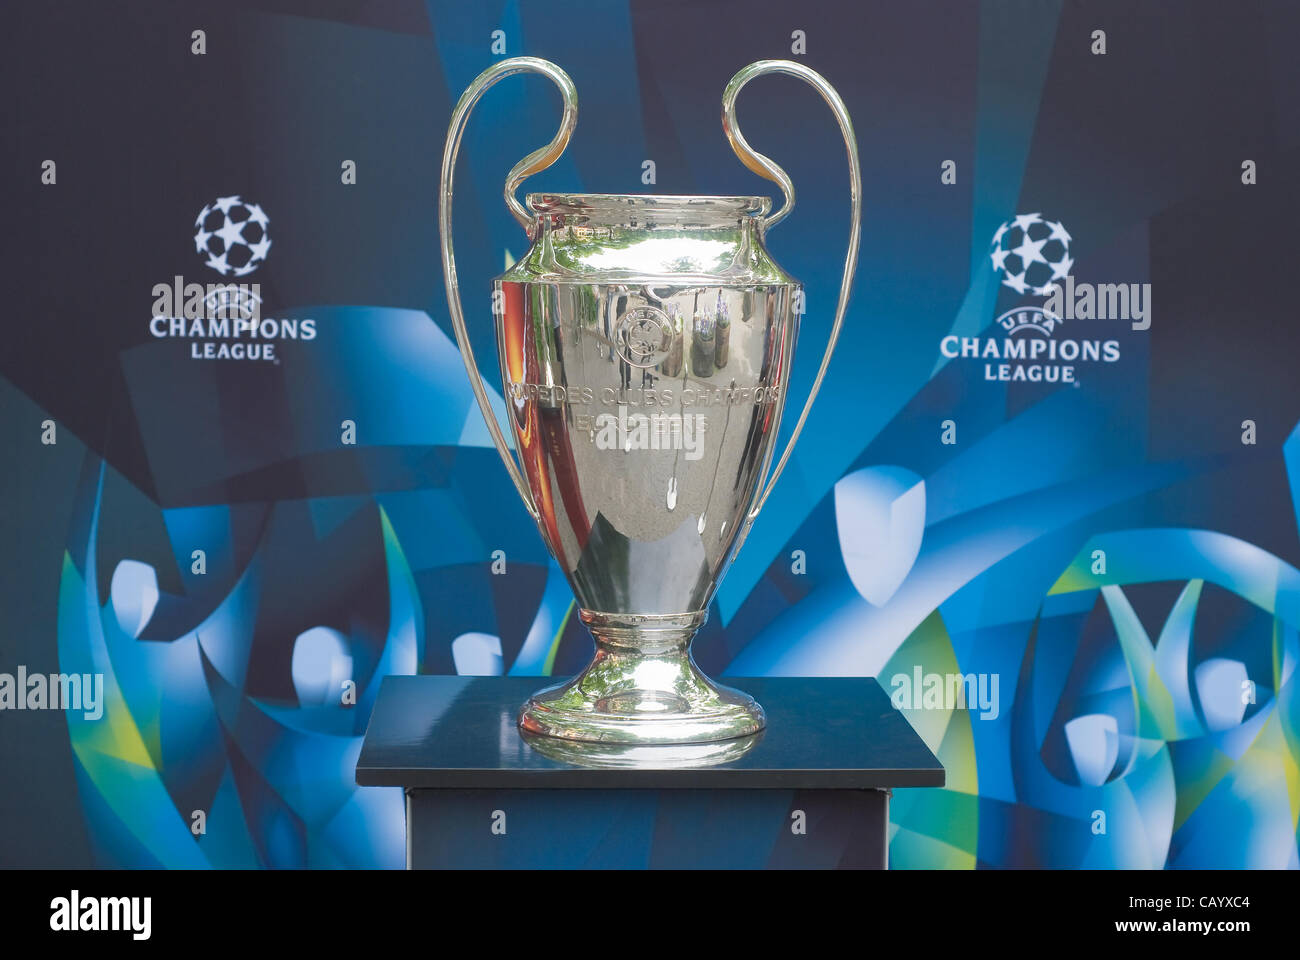 Champions League Trophy High Resolution Stock Photography and Images - Alamy